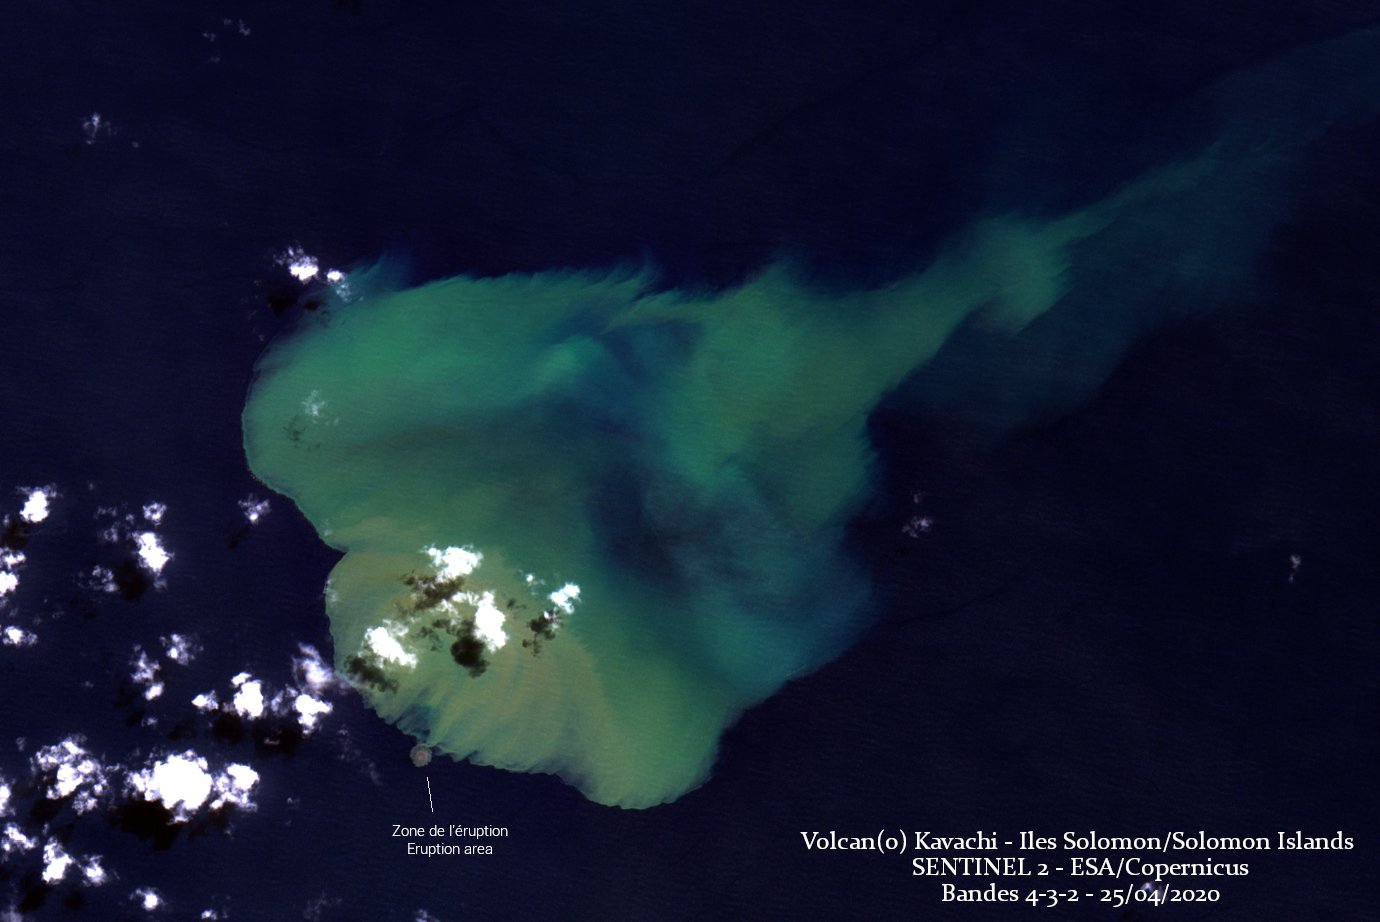 Discolored water around the Kavachi volcano (image: @CultureVolcan/twitter)